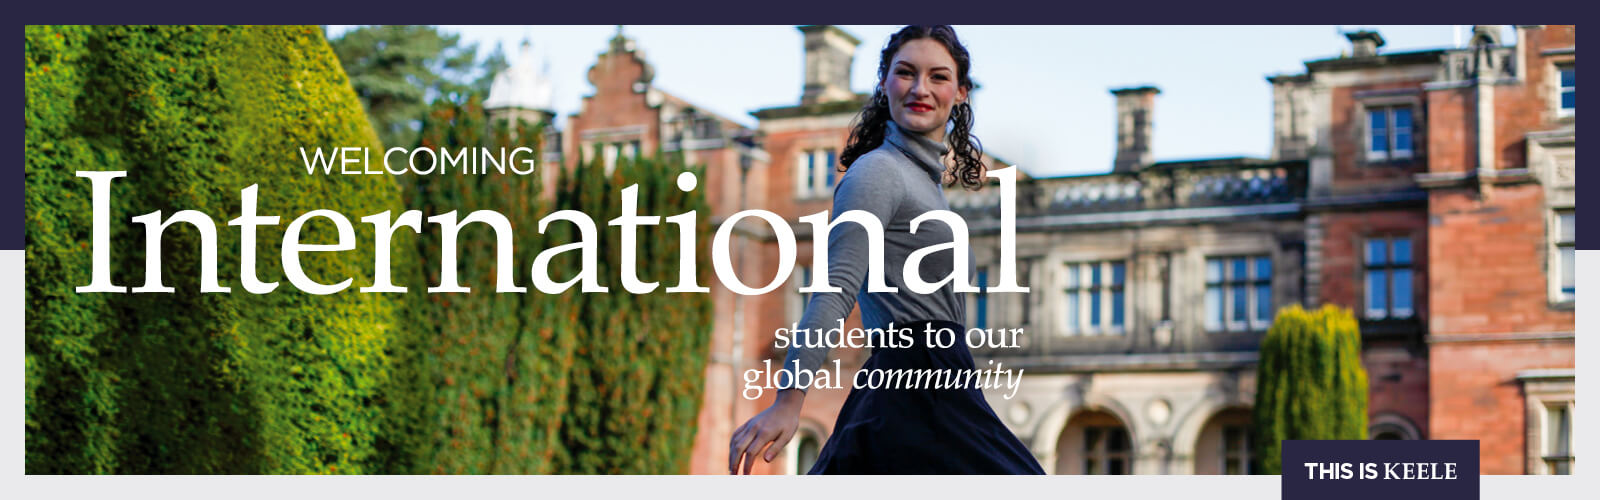 Welcoming international students to our global community